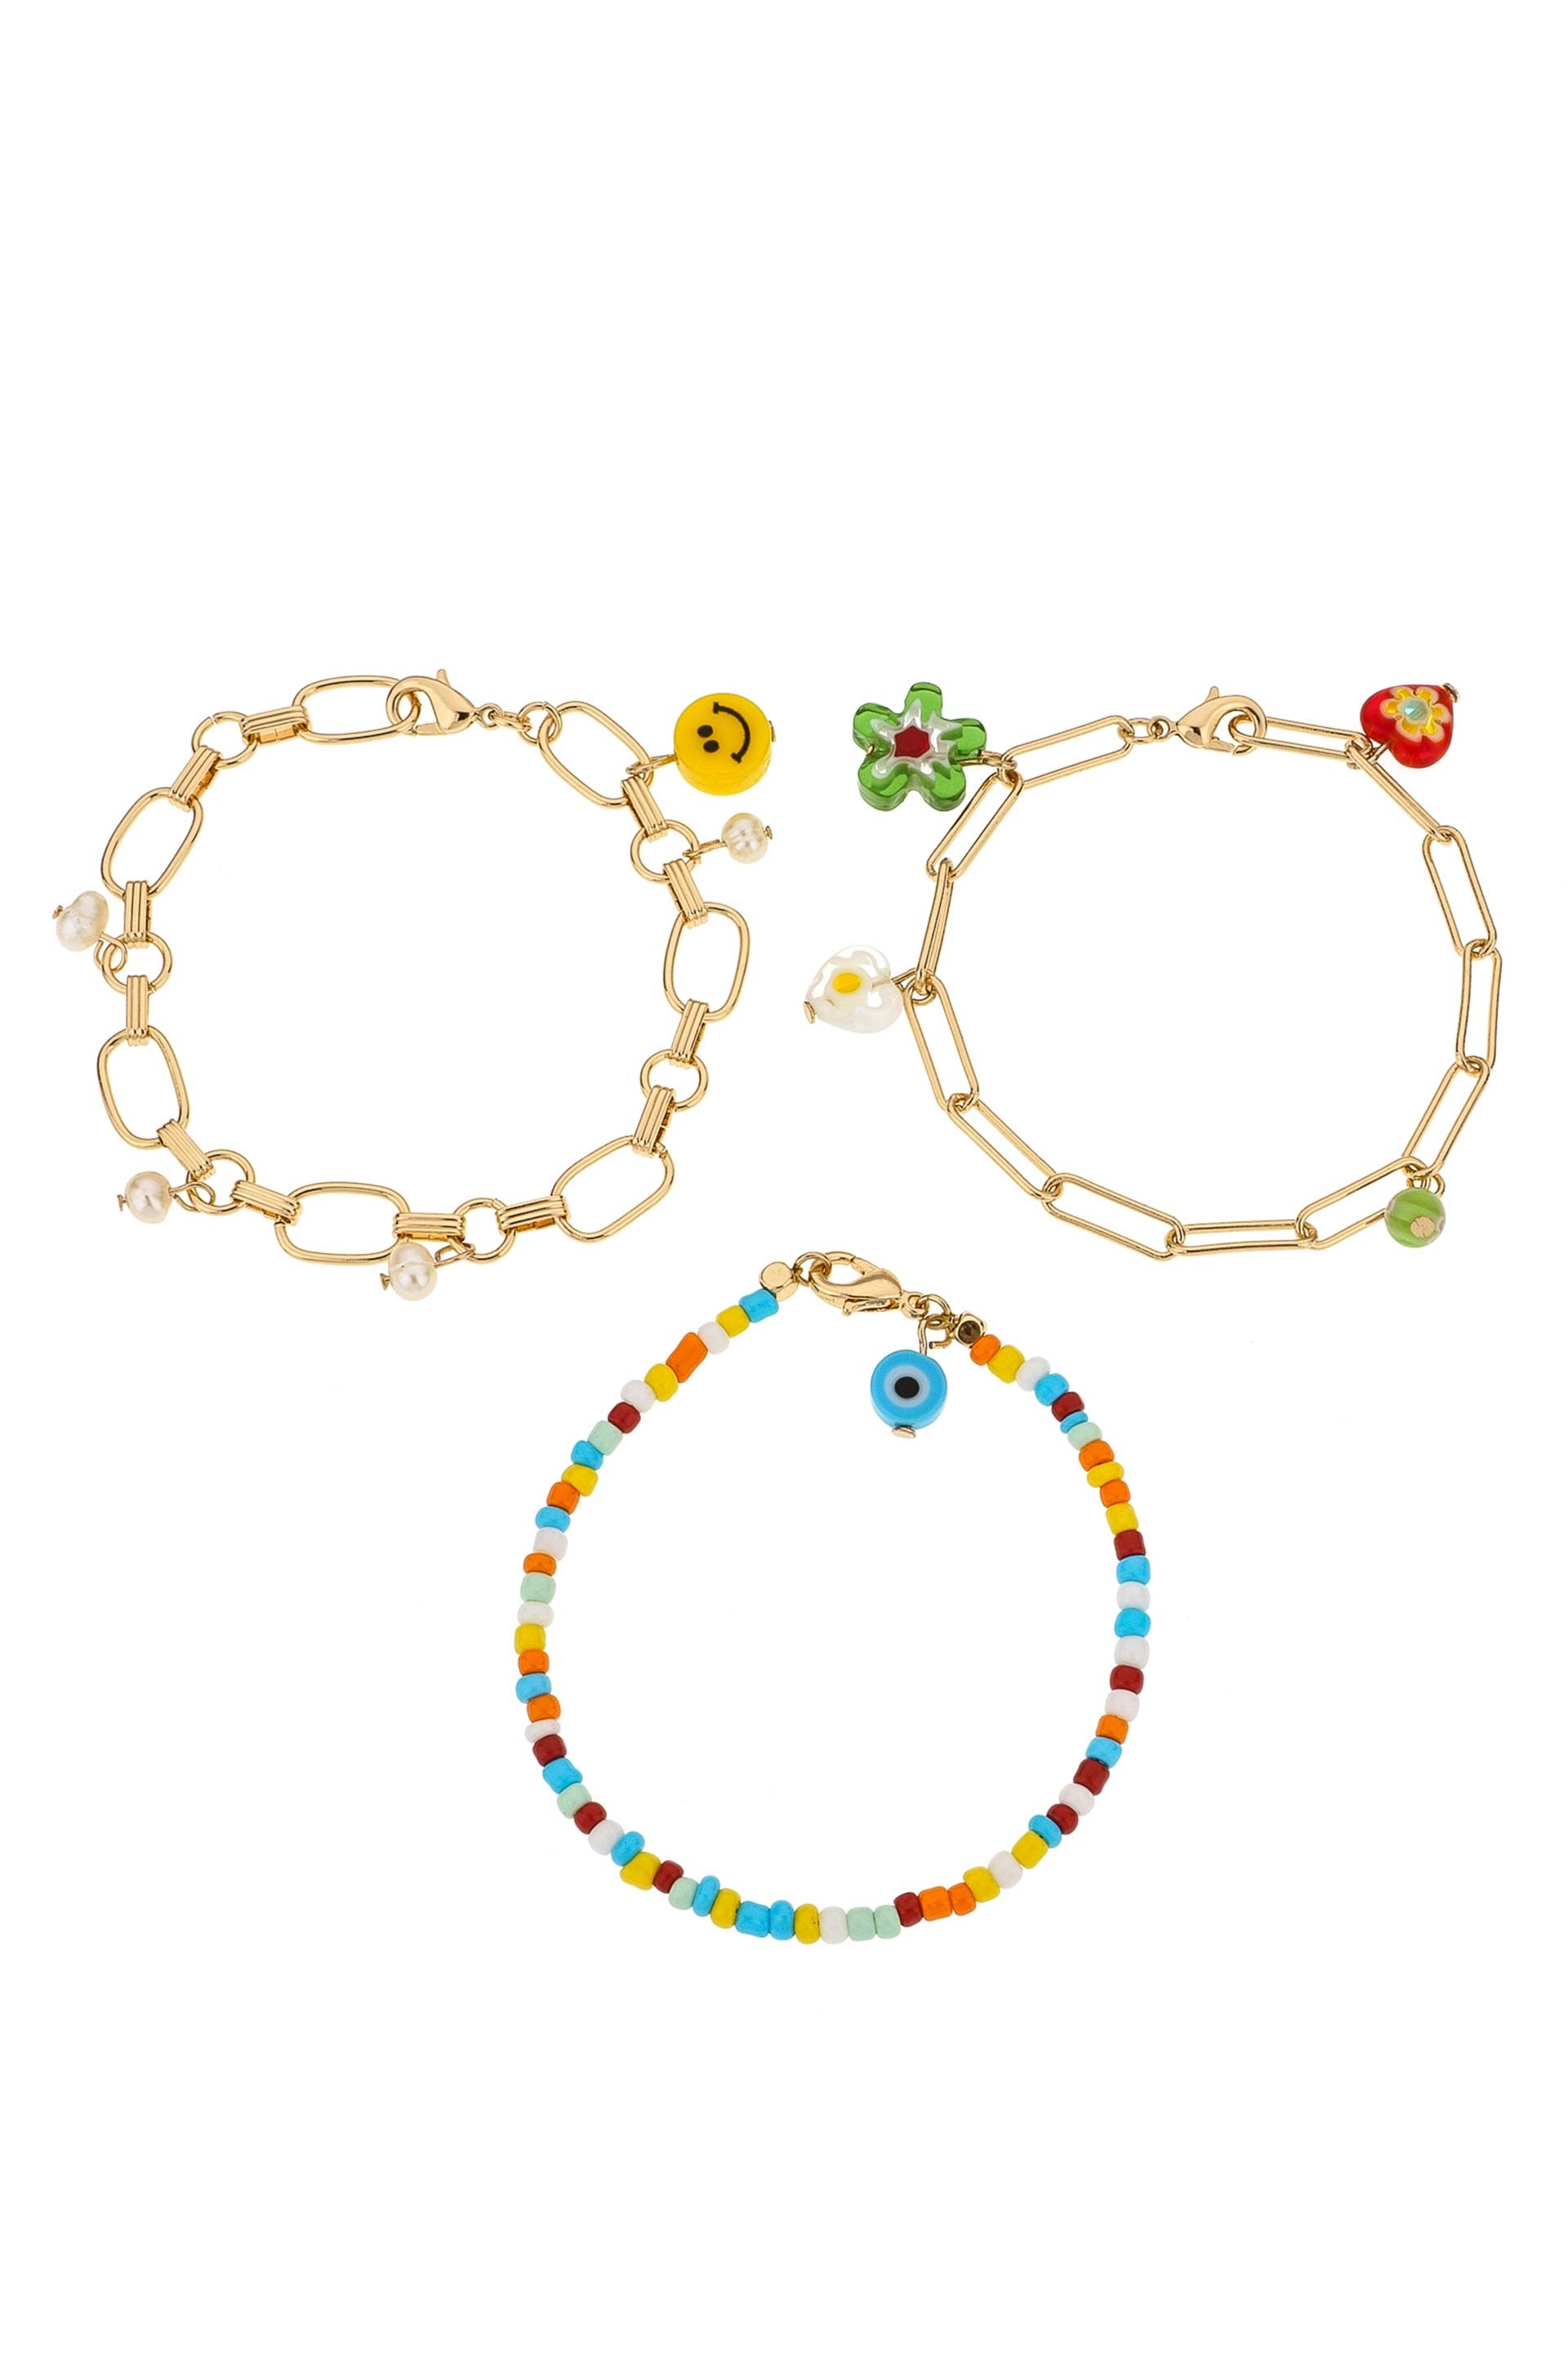 Happiness Beaded and 18k Gold Plated Charm Bracelet Set on white